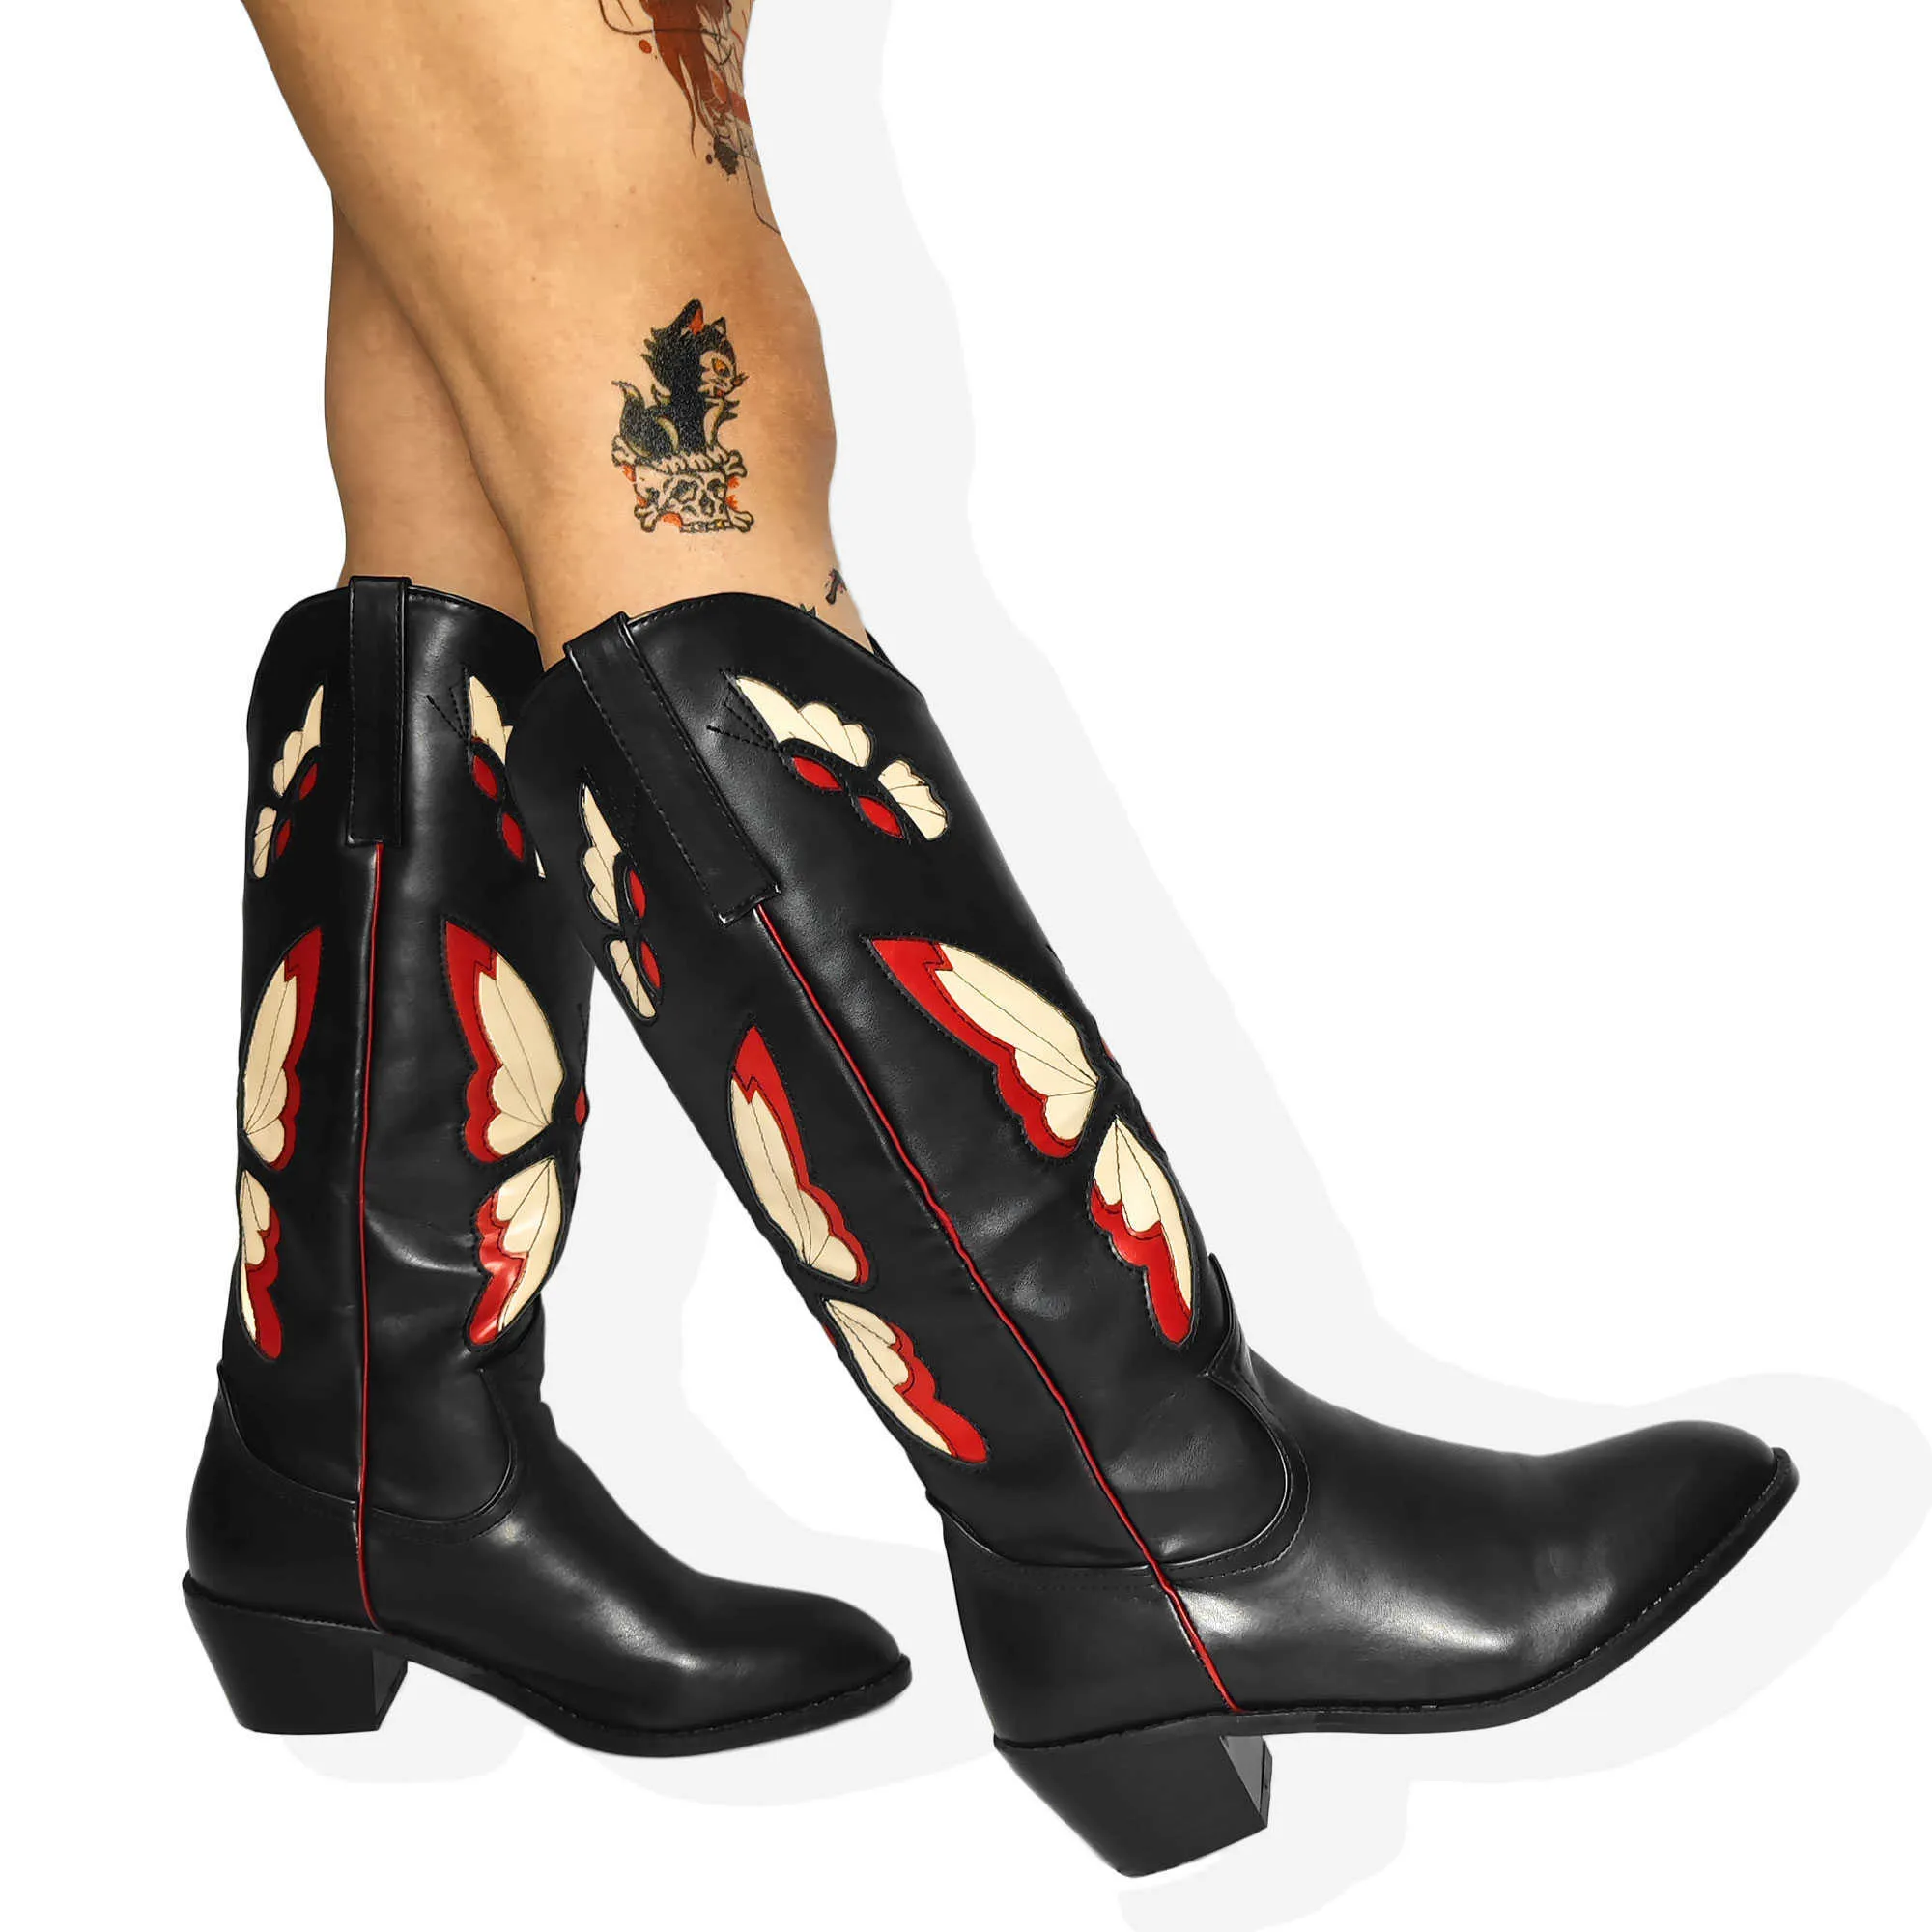 Boots Cowboy Cowgirl Mid Calf Boots Butterfly Embroidered Brand Design Gothic Style Autumn Winter Slip On Western Retro Shoes Z0605